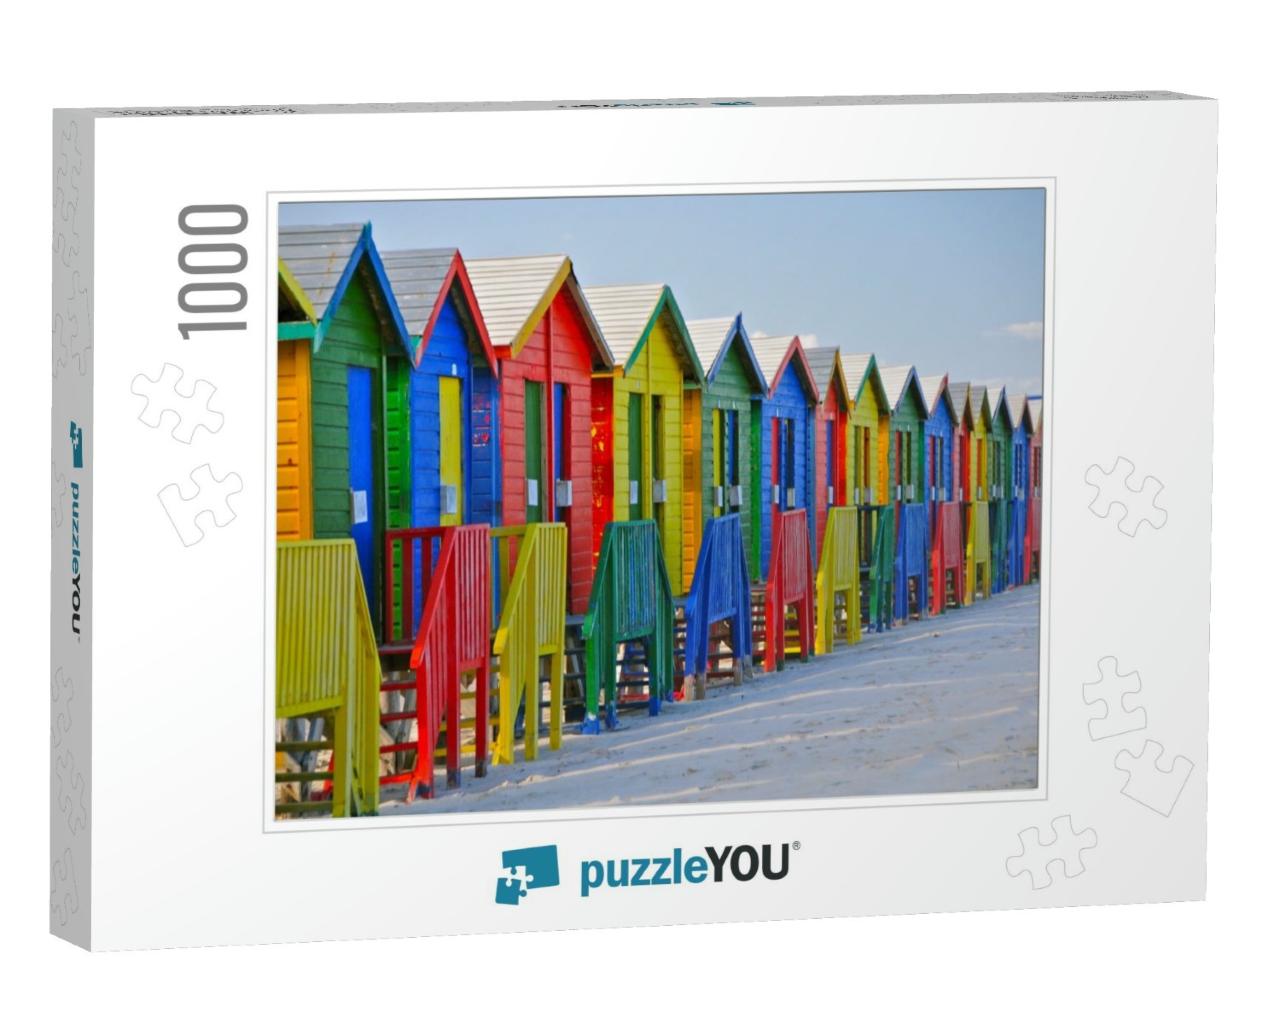 Colored Beach Huts, Cape Town, South Africa... Jigsaw Puzzle with 1000 pieces